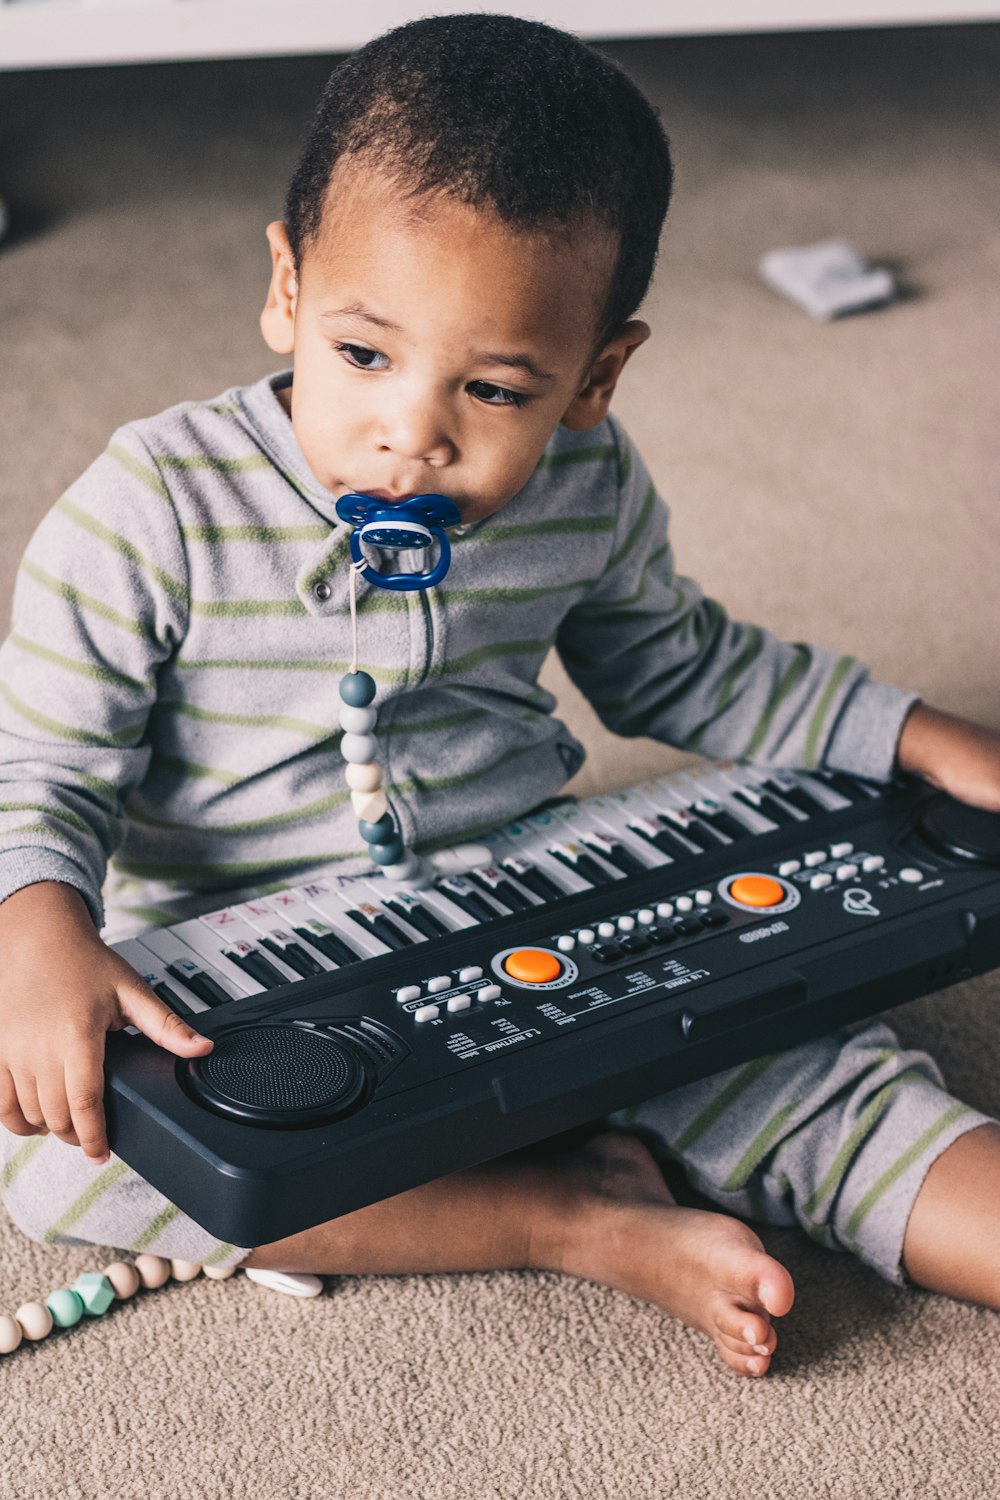 a young boy sitting on the floor with a musical keyboard